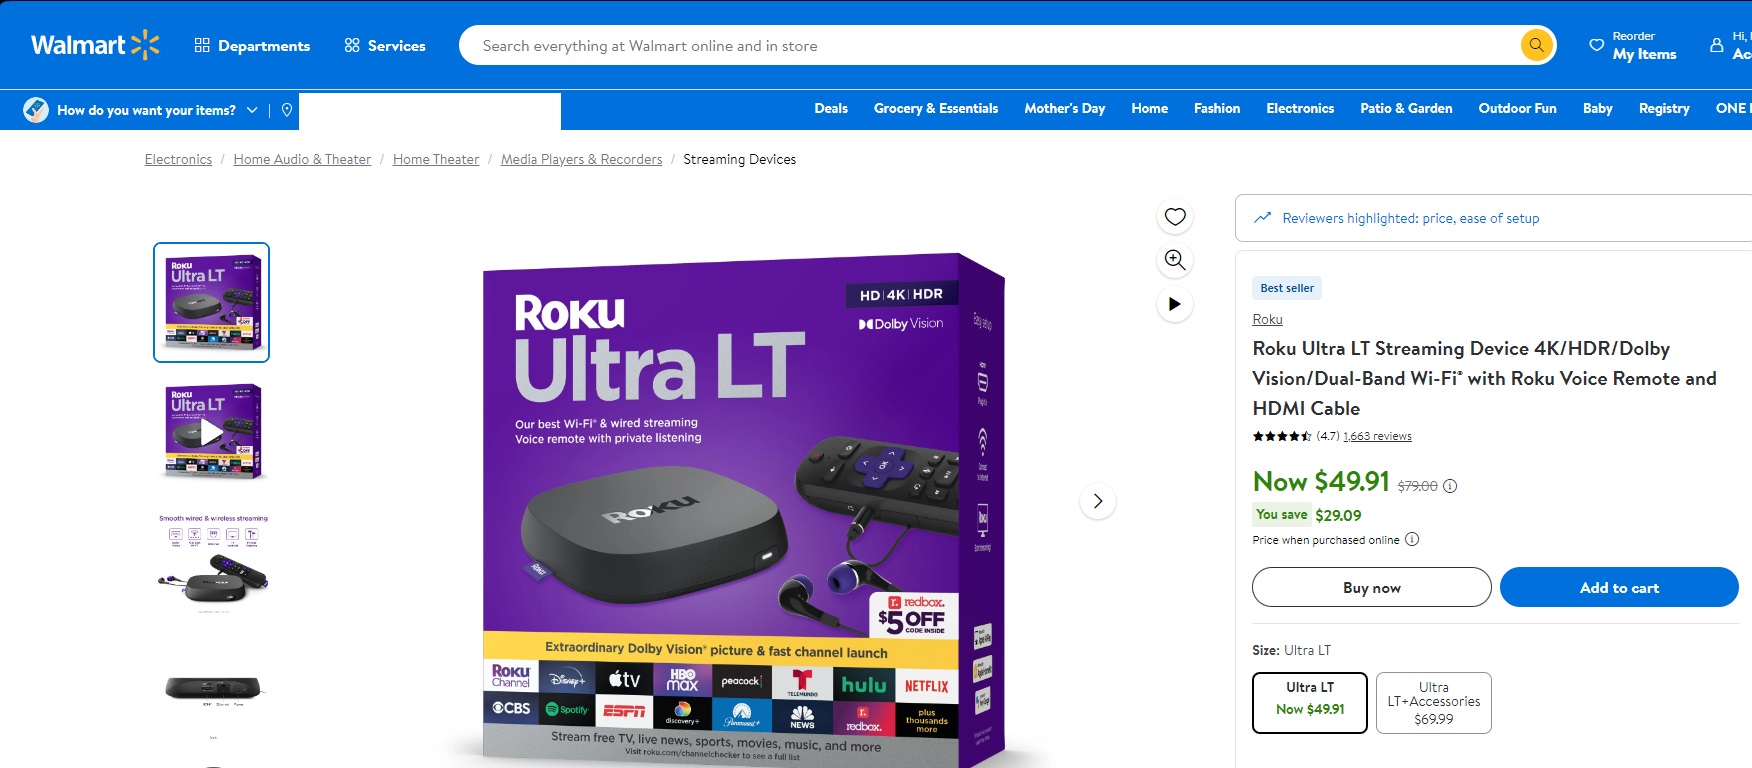 Roku Ultra LT Streaming Device 4K/HDR/Dolby Vision/Dual-Band Wi-Fi® with Roku Voice Remote and HDMI Cable $49.91